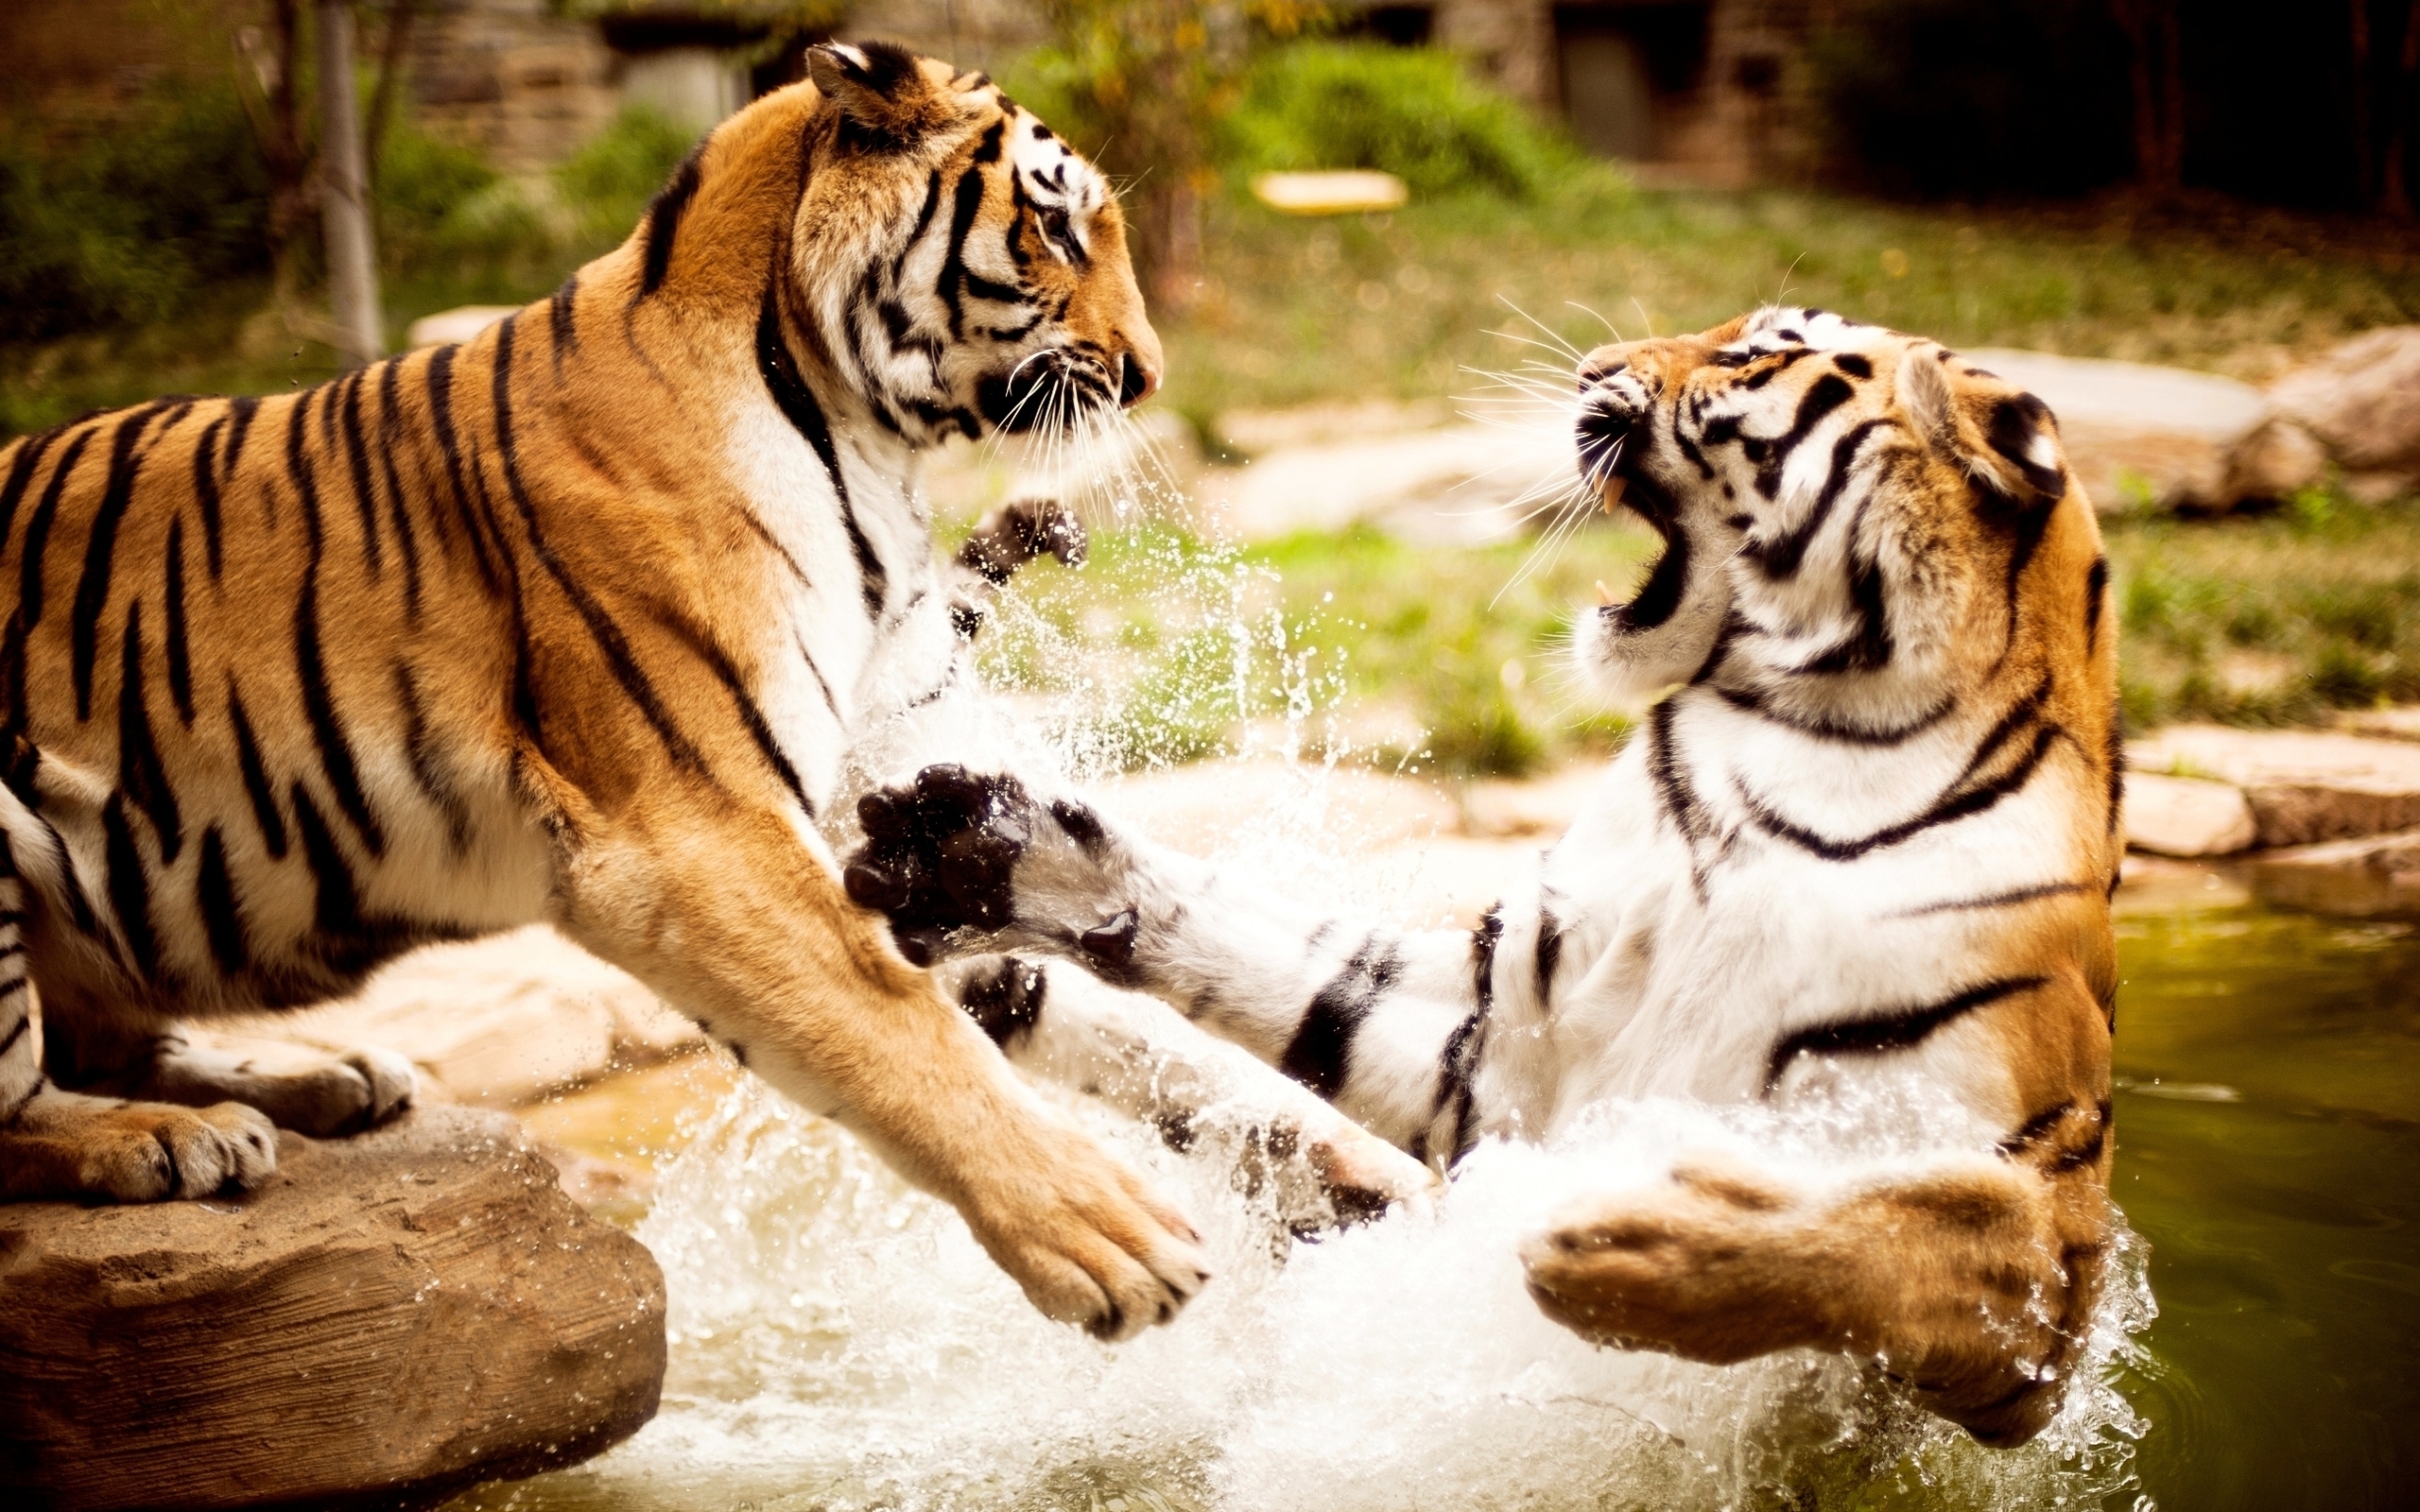 Tigers Fight for 2560 x 1600 widescreen resolution